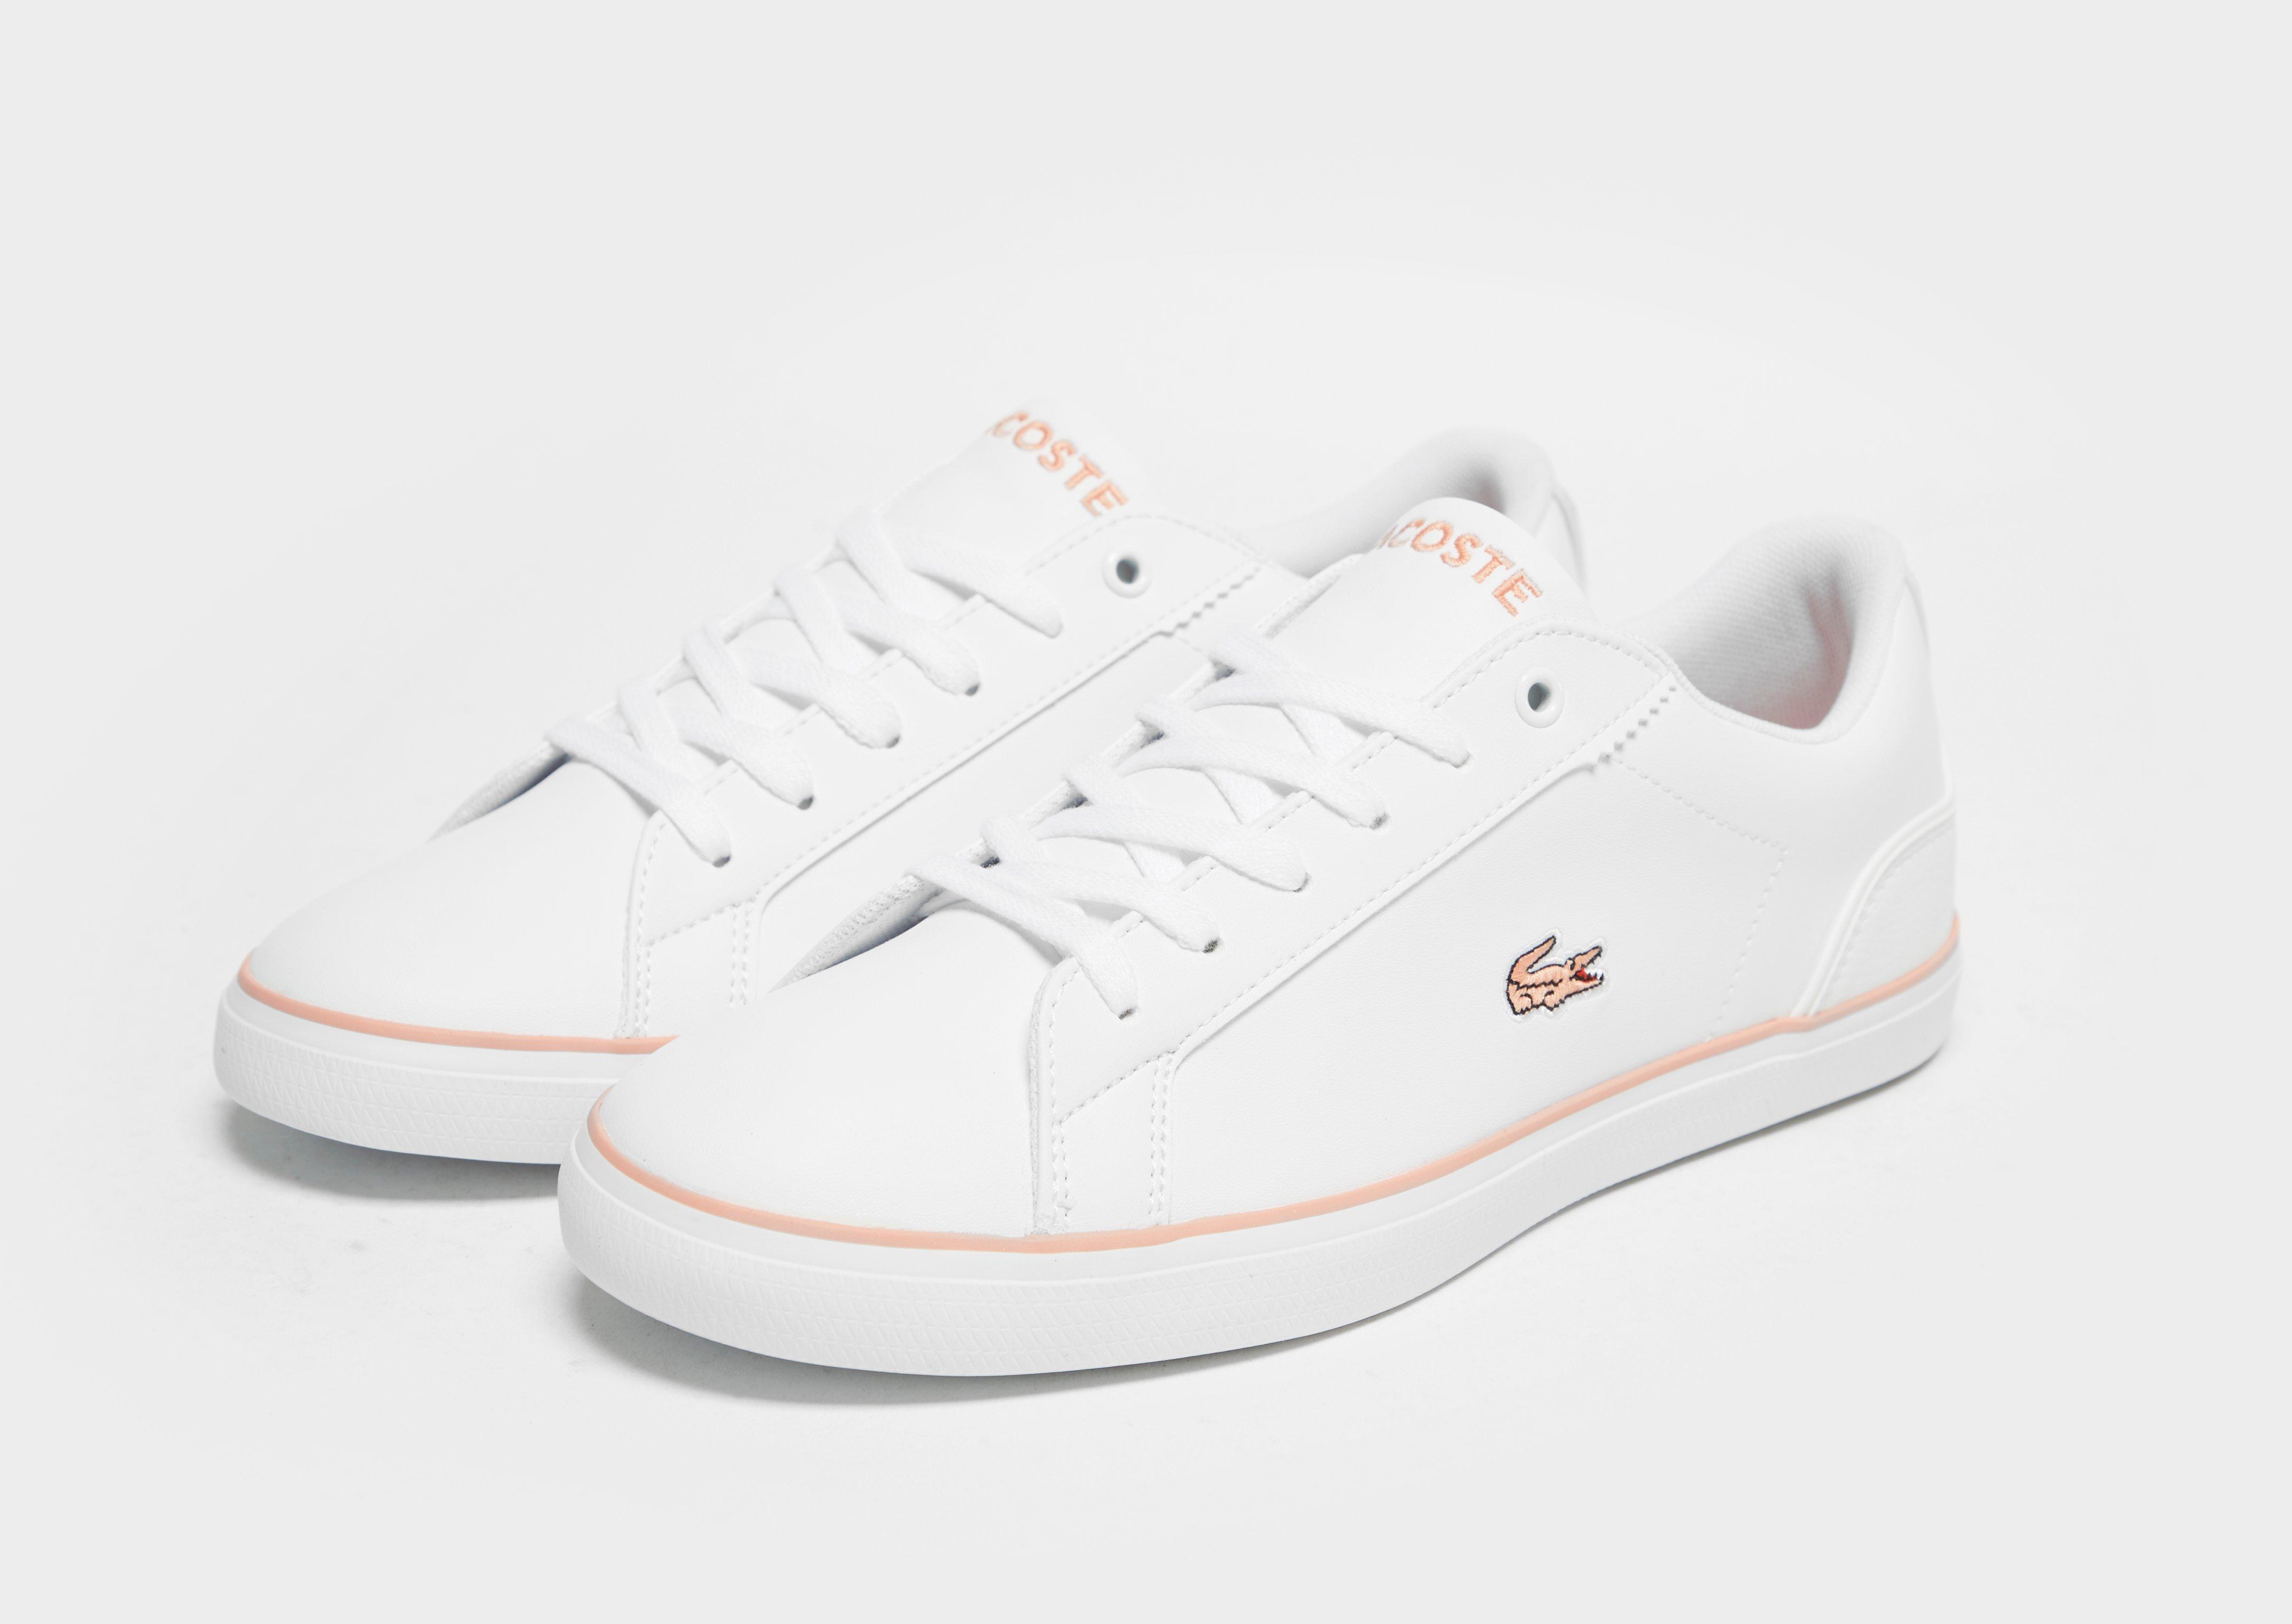 lacoste shoes jd sports